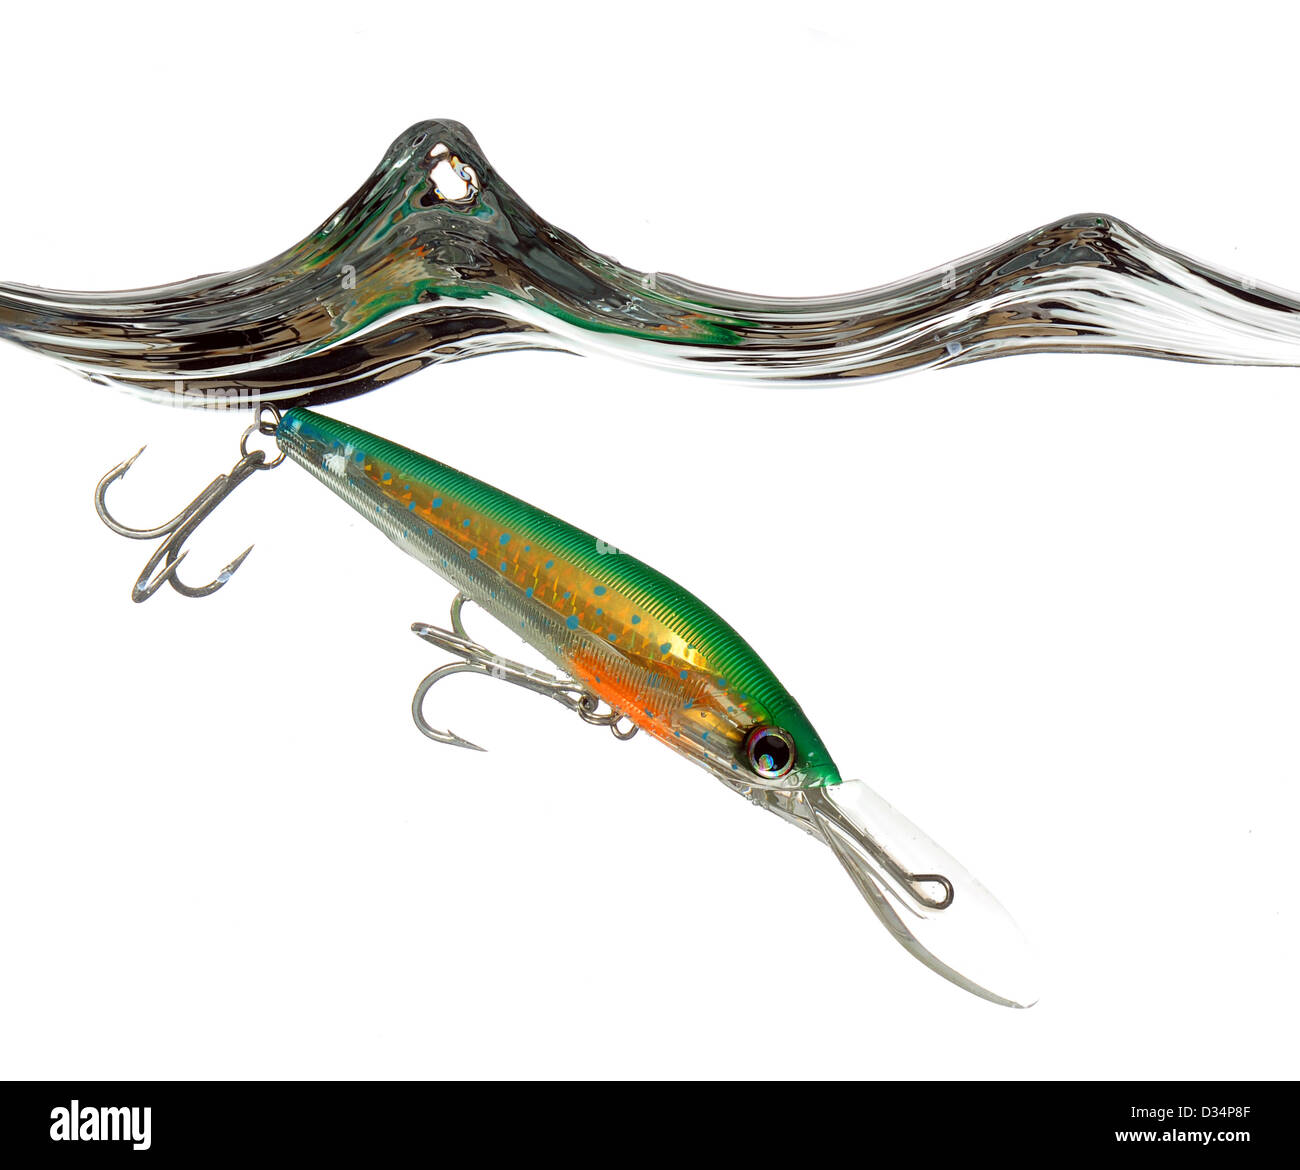 green and orange lure or fishing bait making a splash in water on white  background Stock Photo - Alamy